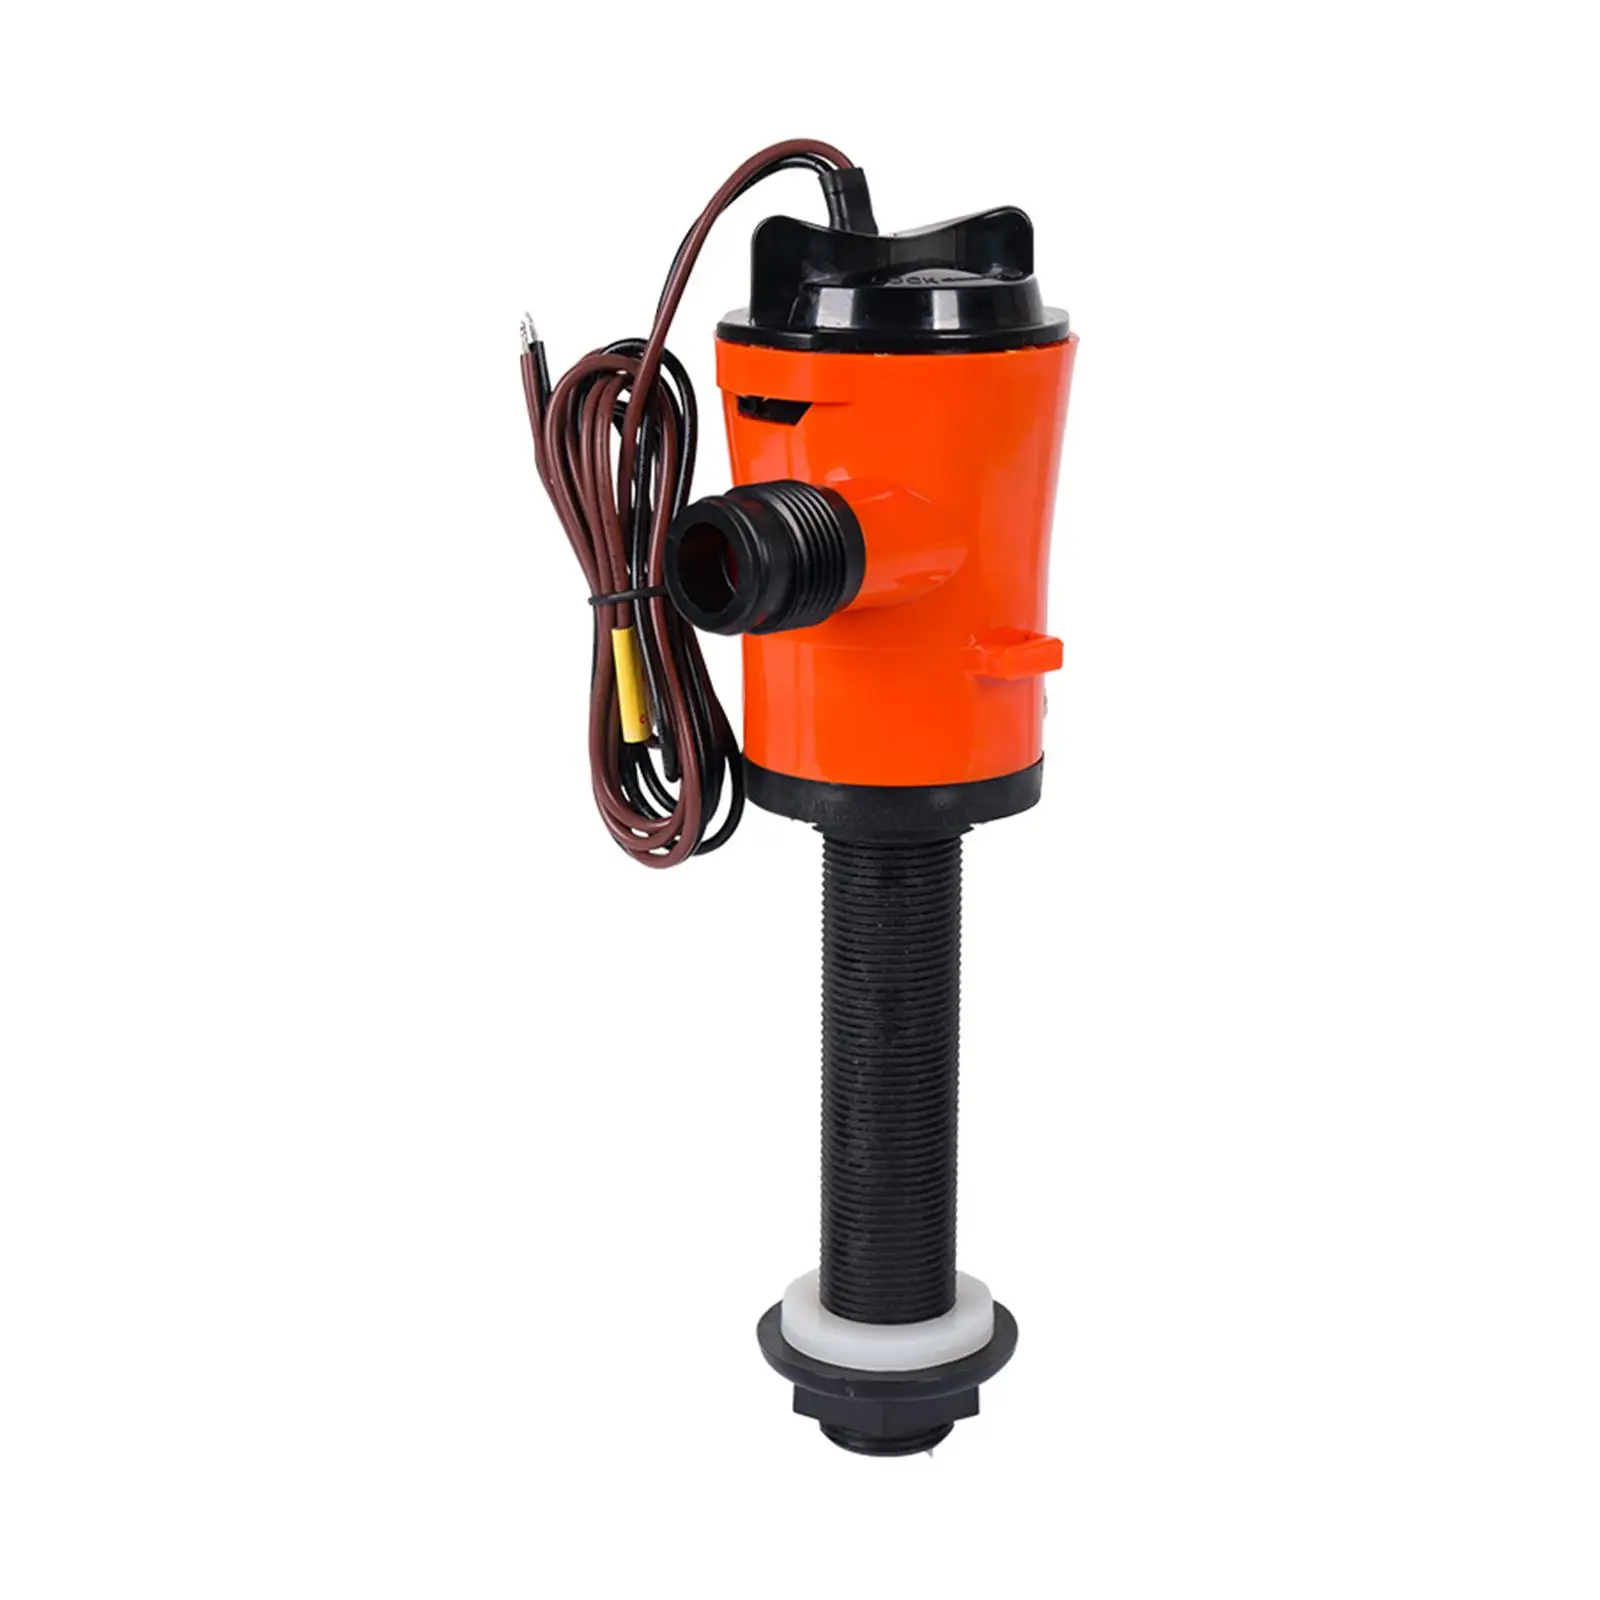 Livewell Pump Replaces Submersible Assembly Easy to Clean Durable Professional with Filter Accessories Boat Aerator Pump